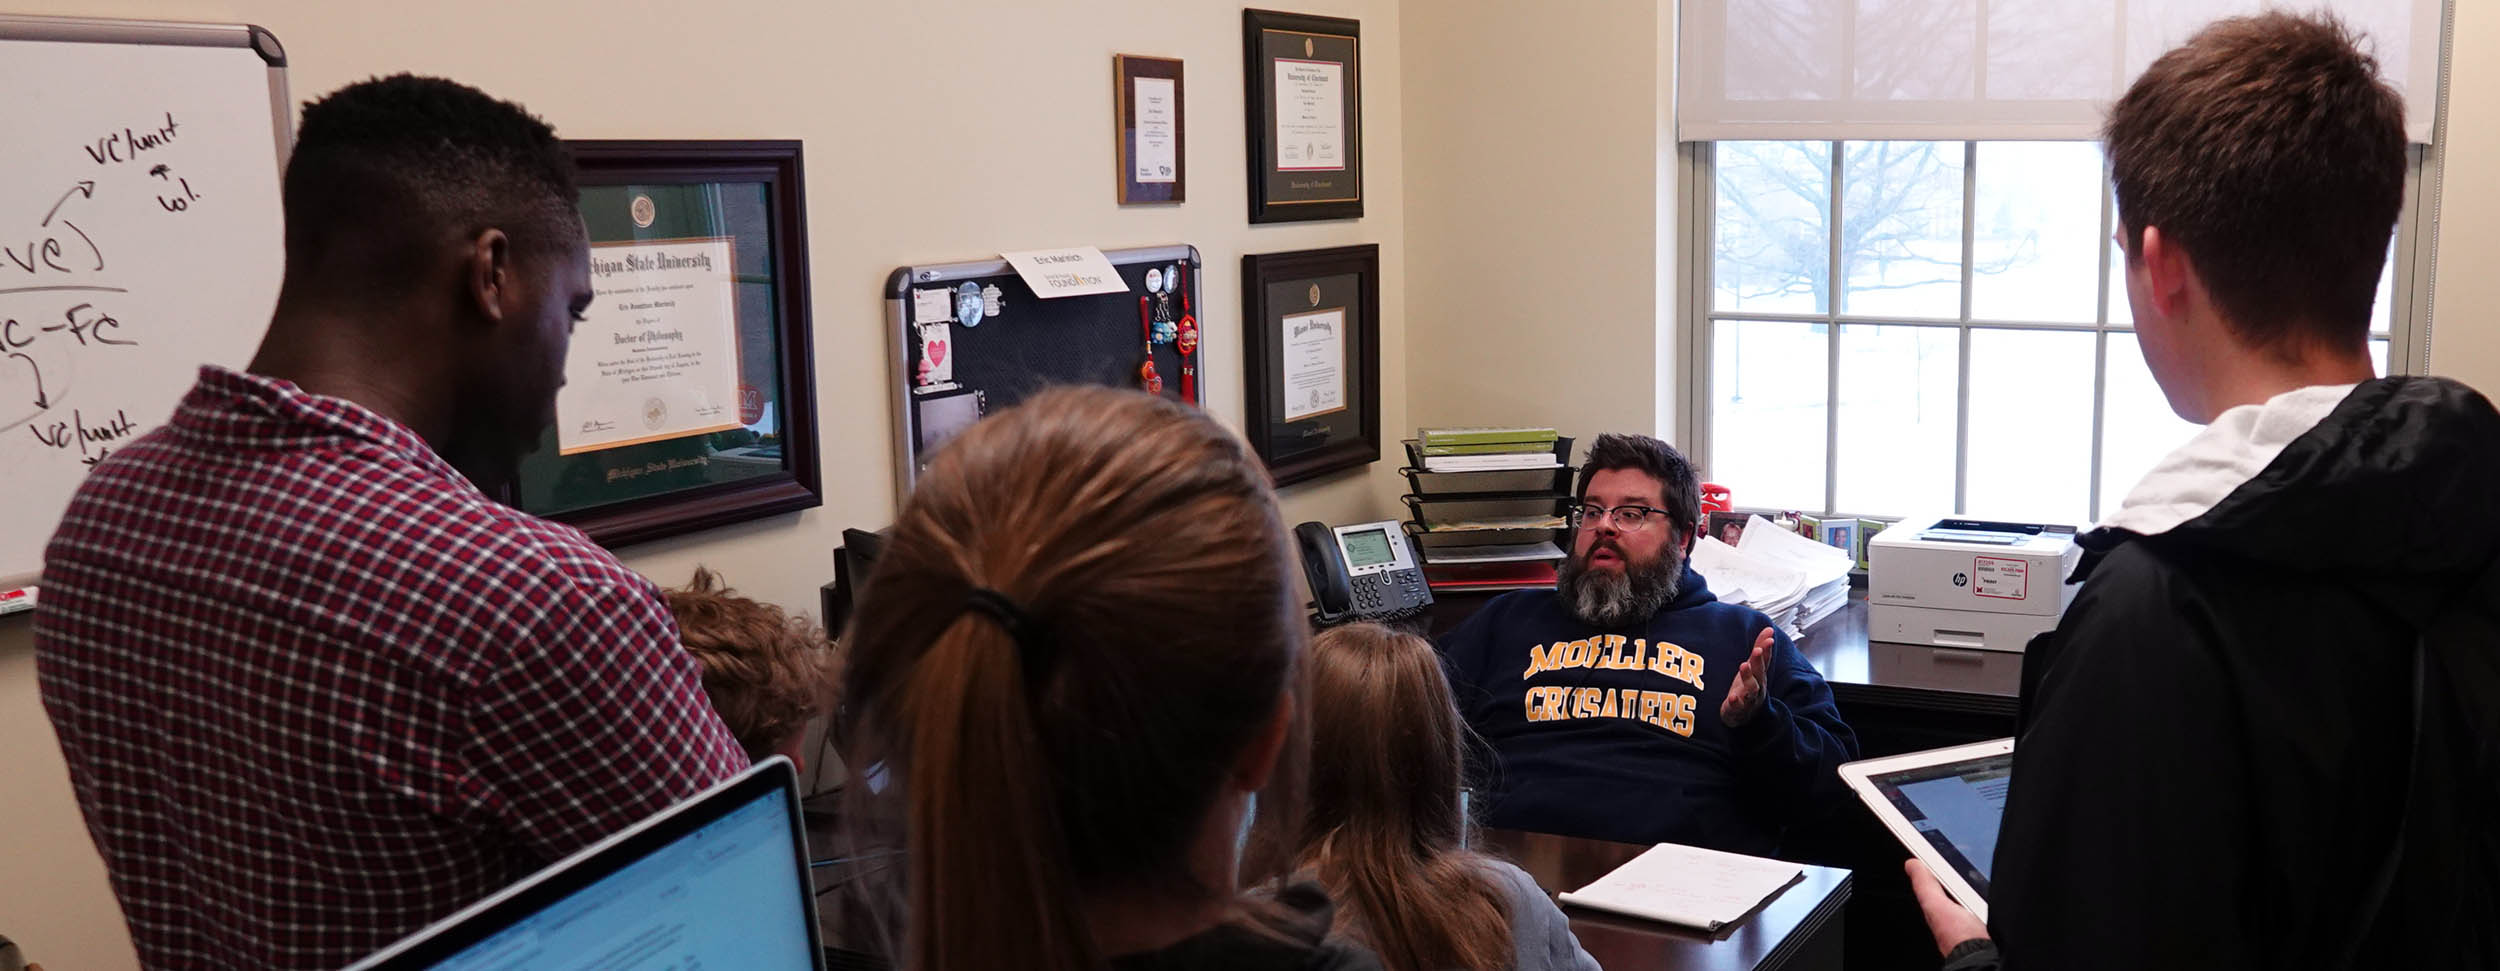 Eric Maranich talks with students in his office